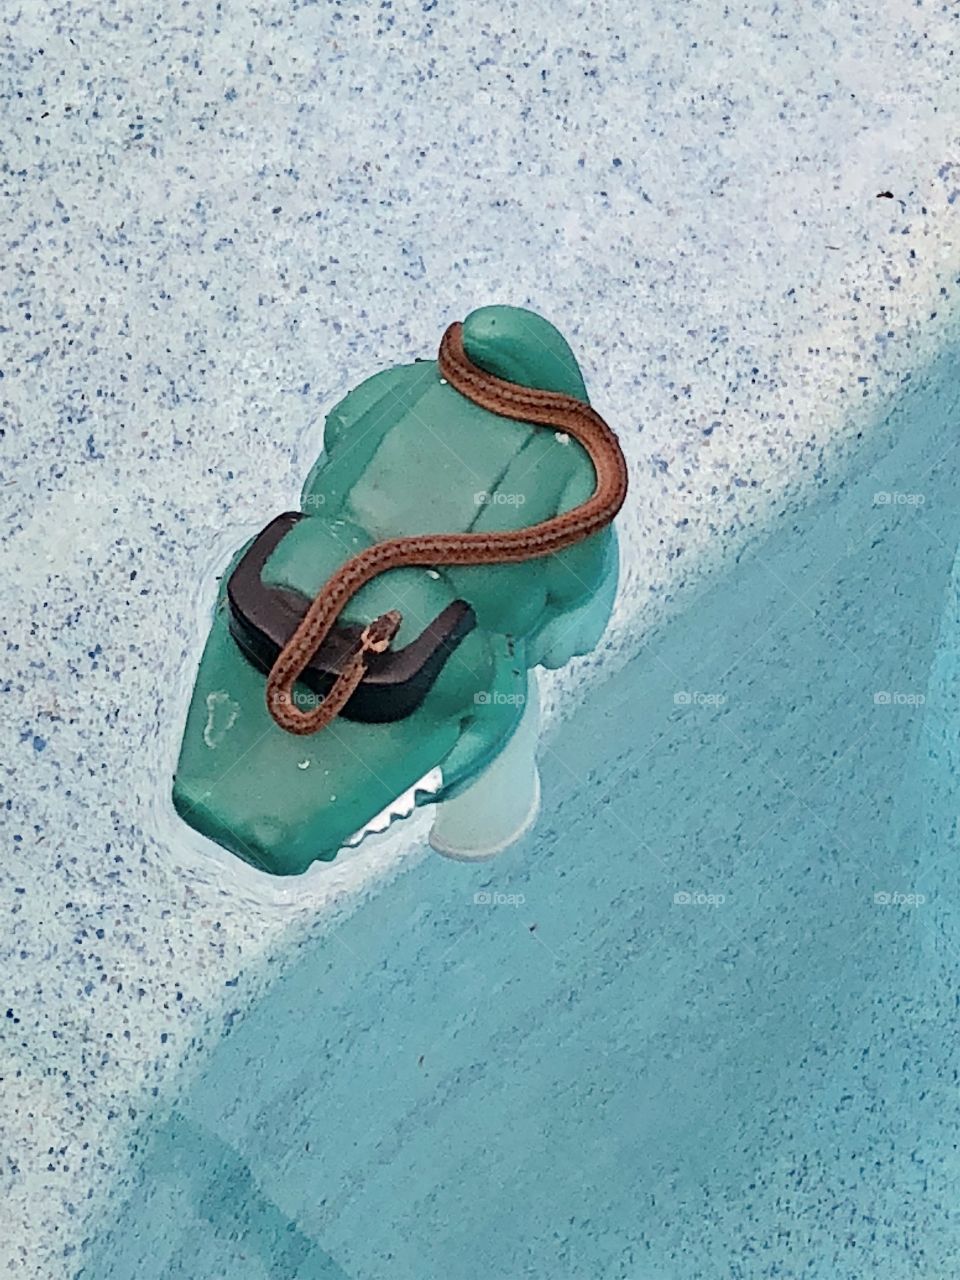 Baby snake on pool floating thermometer 